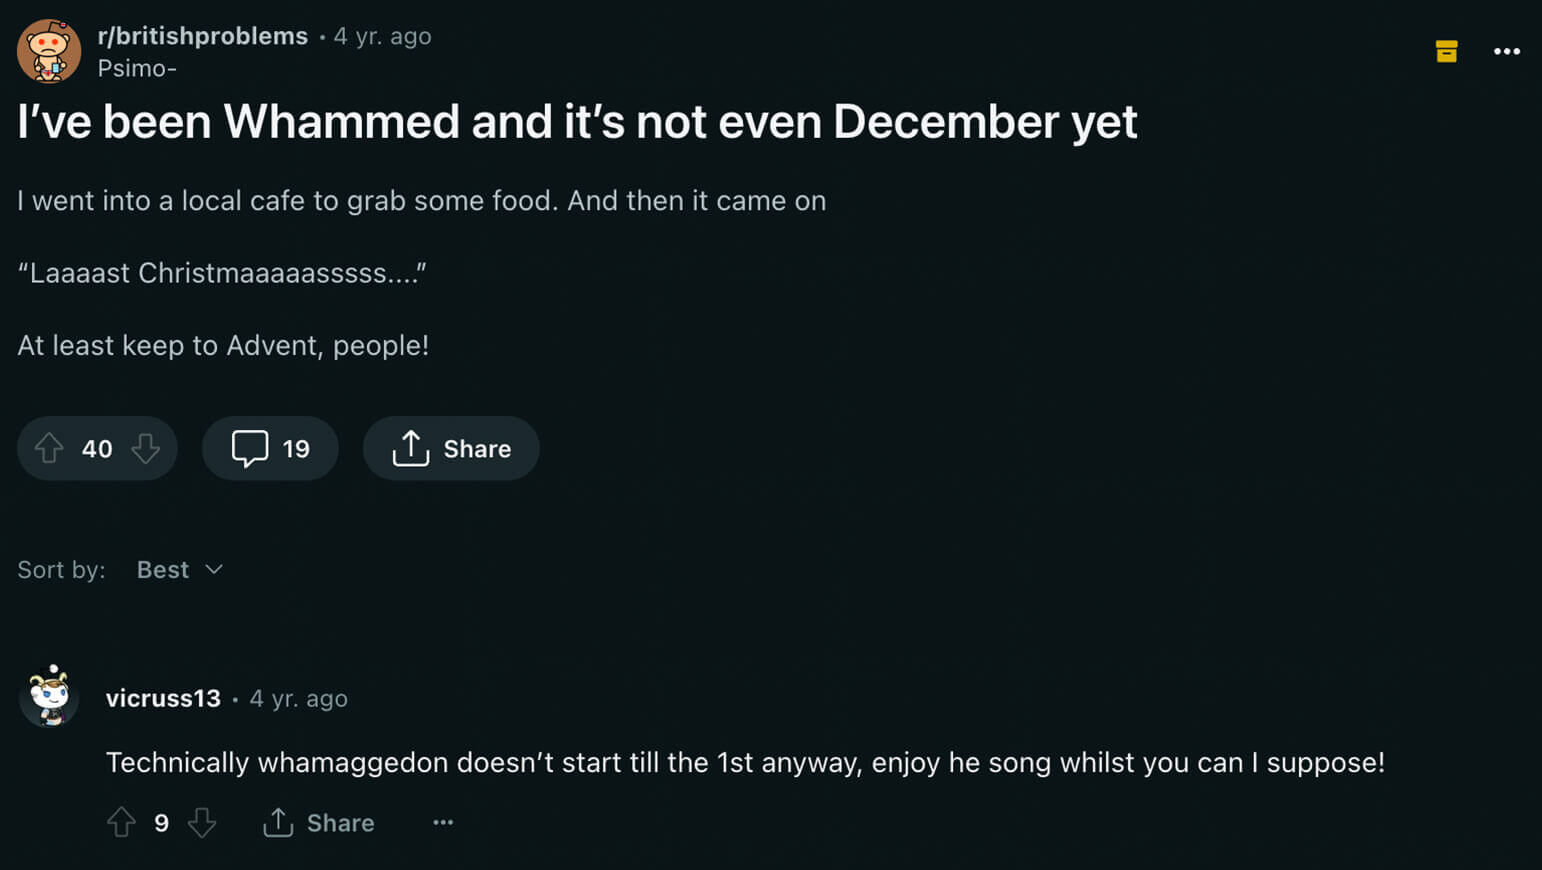 Redditor confessing to getting whammed before December